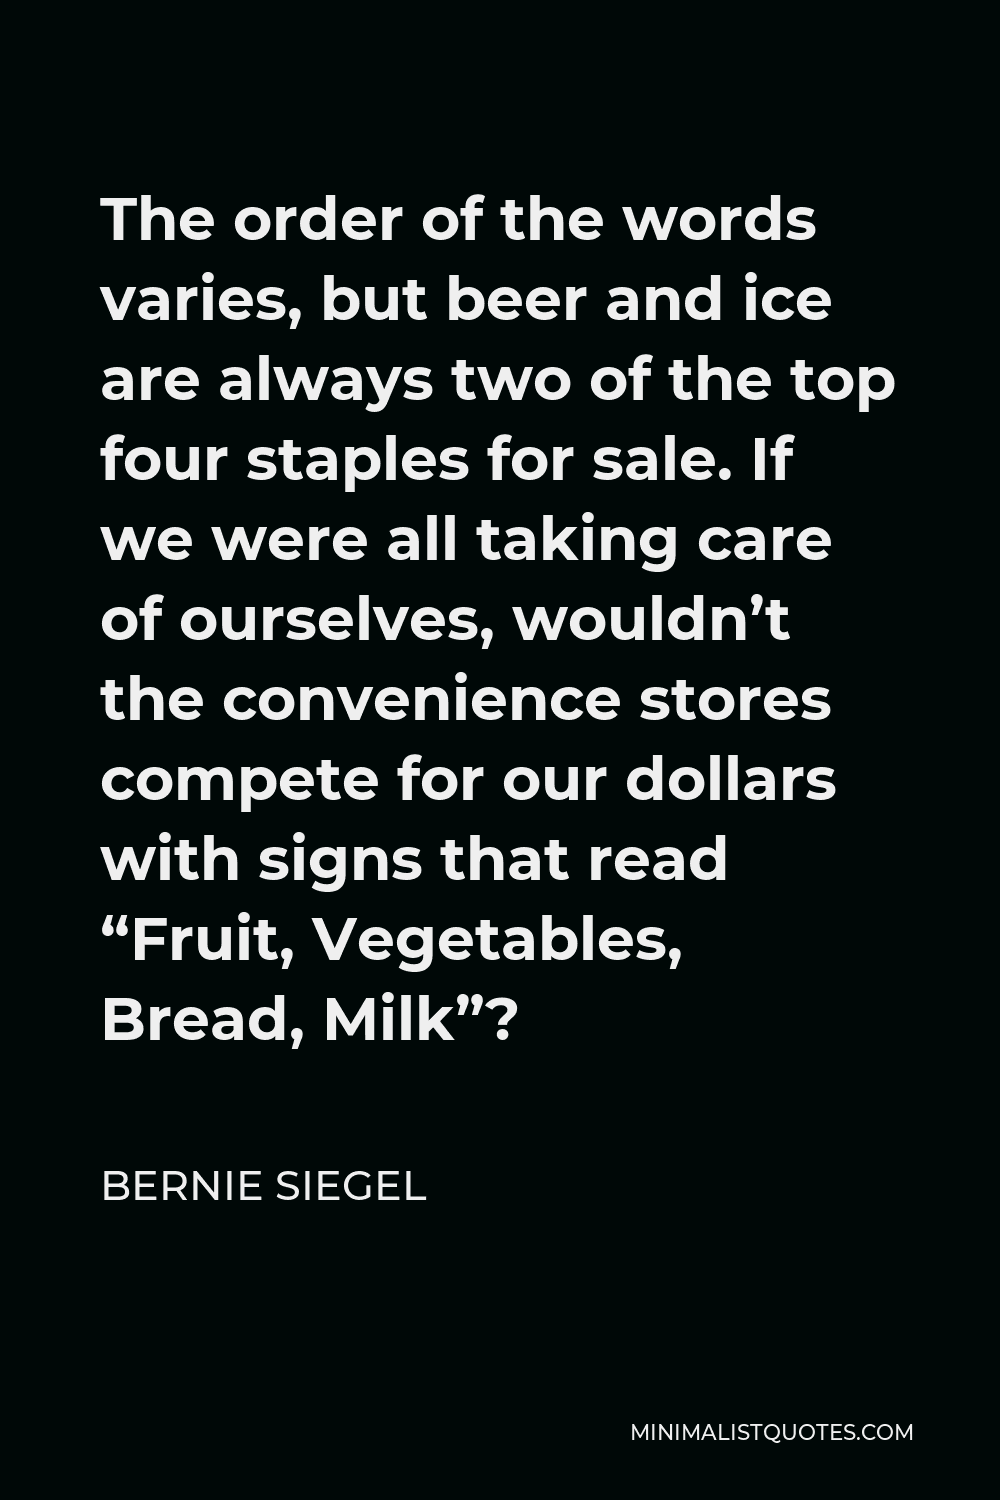 Bernie Siegel Quote - The order of the words varies, but beer and ice are always two of the top four staples for sale. If we were all taking care of ourselves, wouldn’t the convenience stores compete for our dollars with signs that read “Fruit, Vegetables, Bread, Milk”?